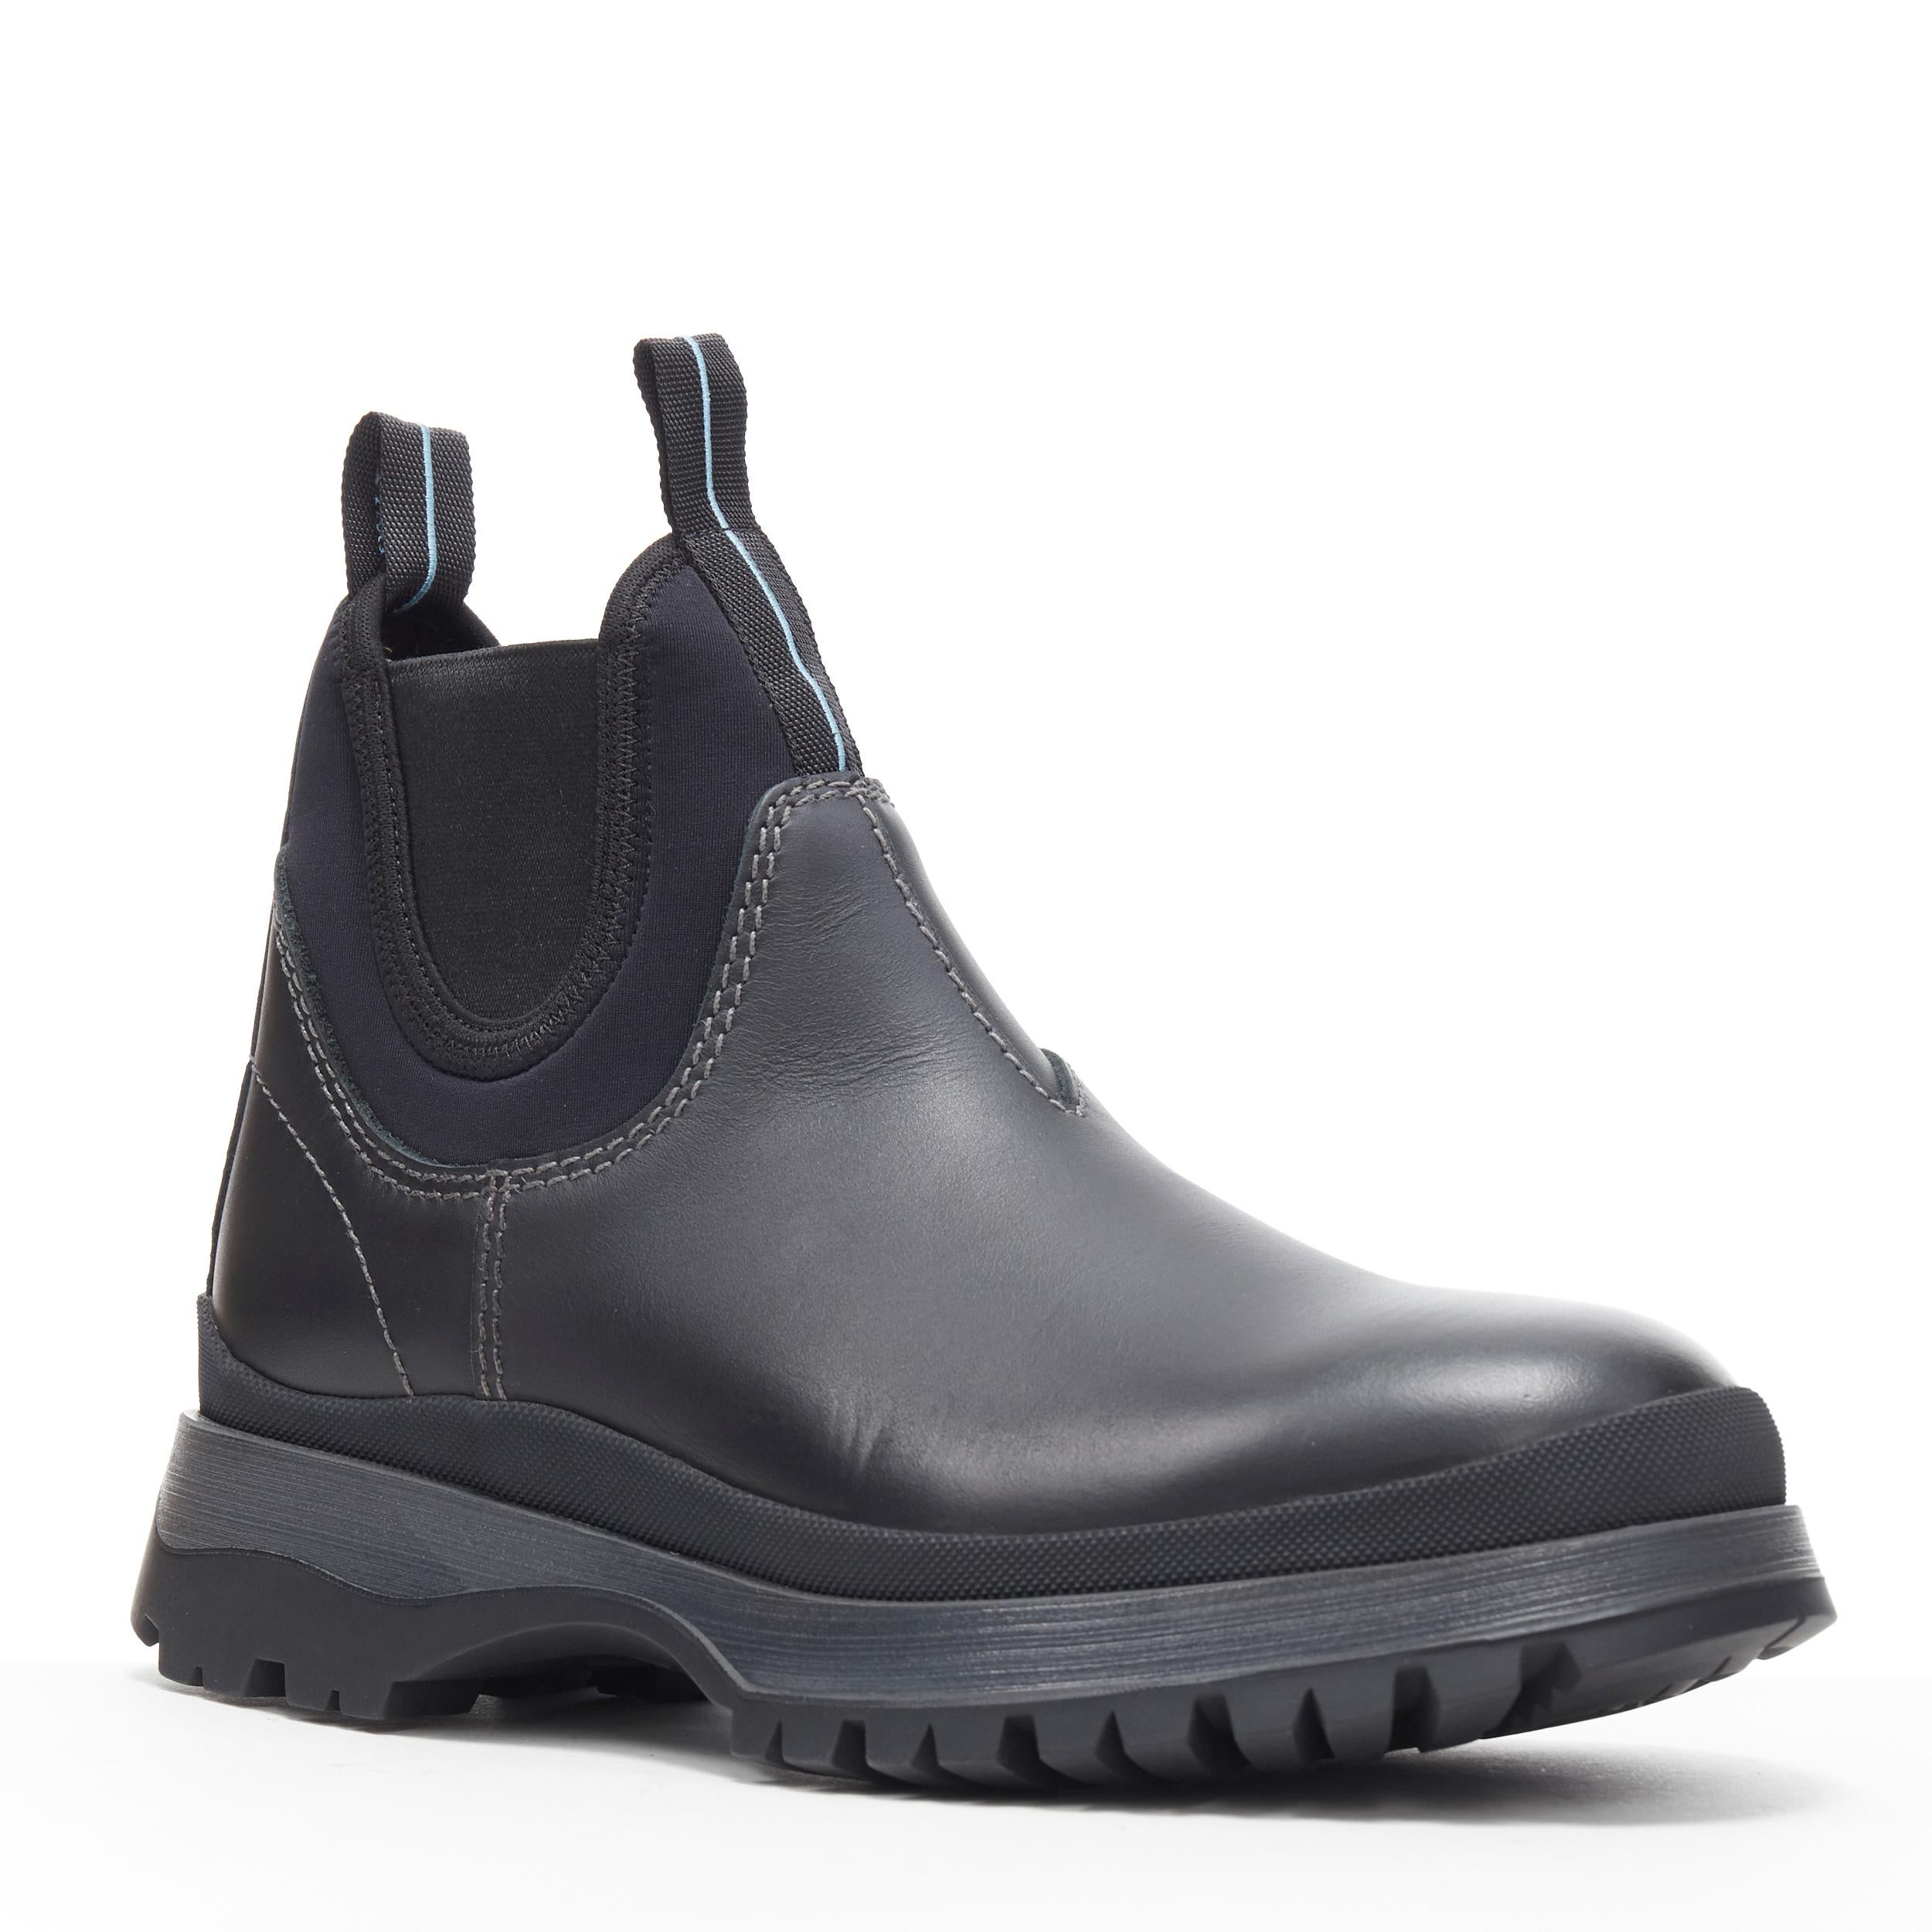 new PRADA Runway Brixxen black calf chunky triple sole ankle boots UK7.5 EU41.5 
Reference: TGAS/A06076 
Brand: Prada 
Designer: Miuccia Prada 
Collection: Fall Winter 2018 Runway 
Material: Leather 
Color: Black 
Pattern: Solid 
Extra Detail: These